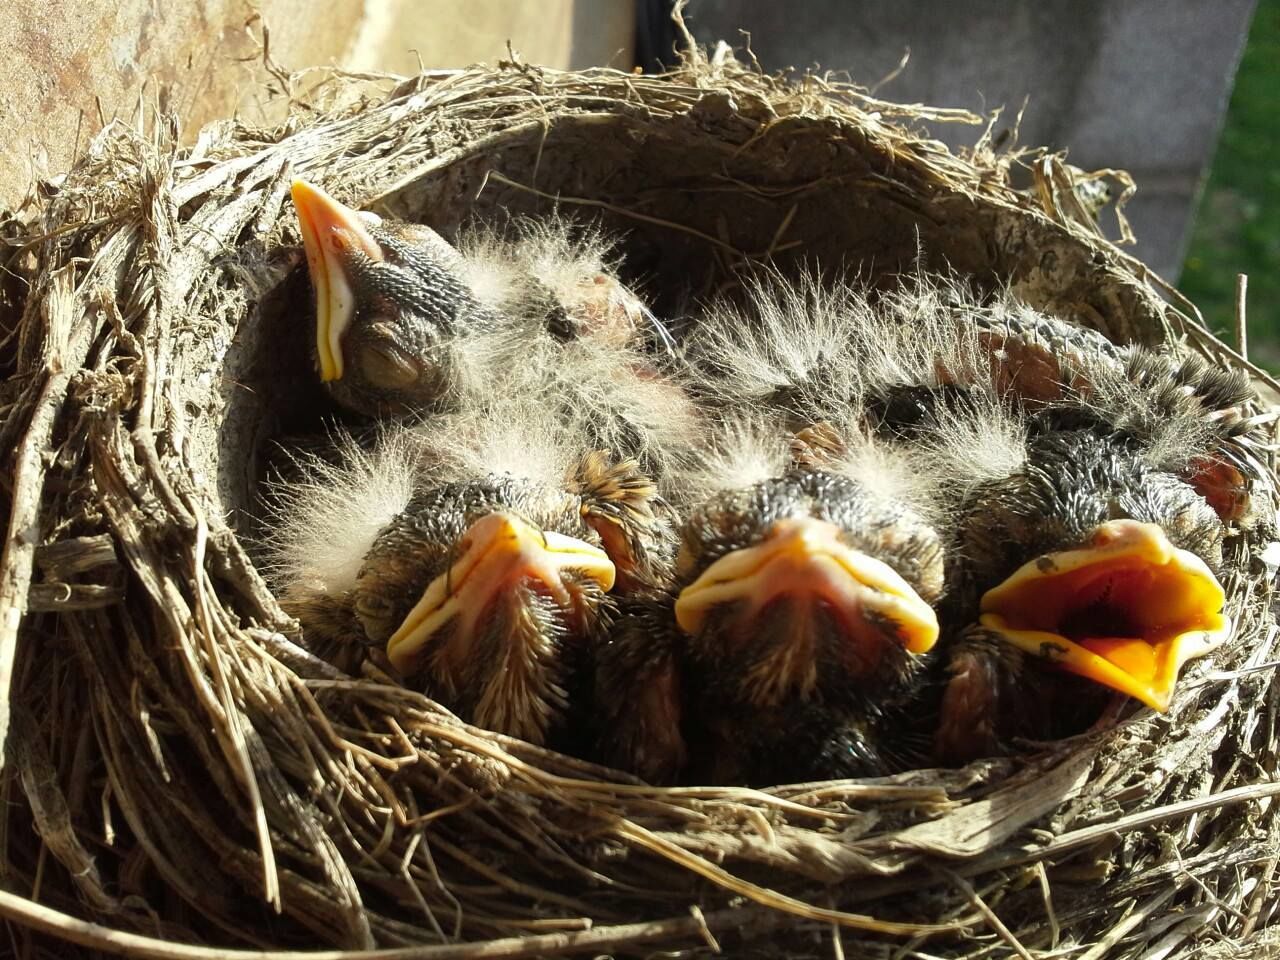 High angle view of young robins relaxing in nest